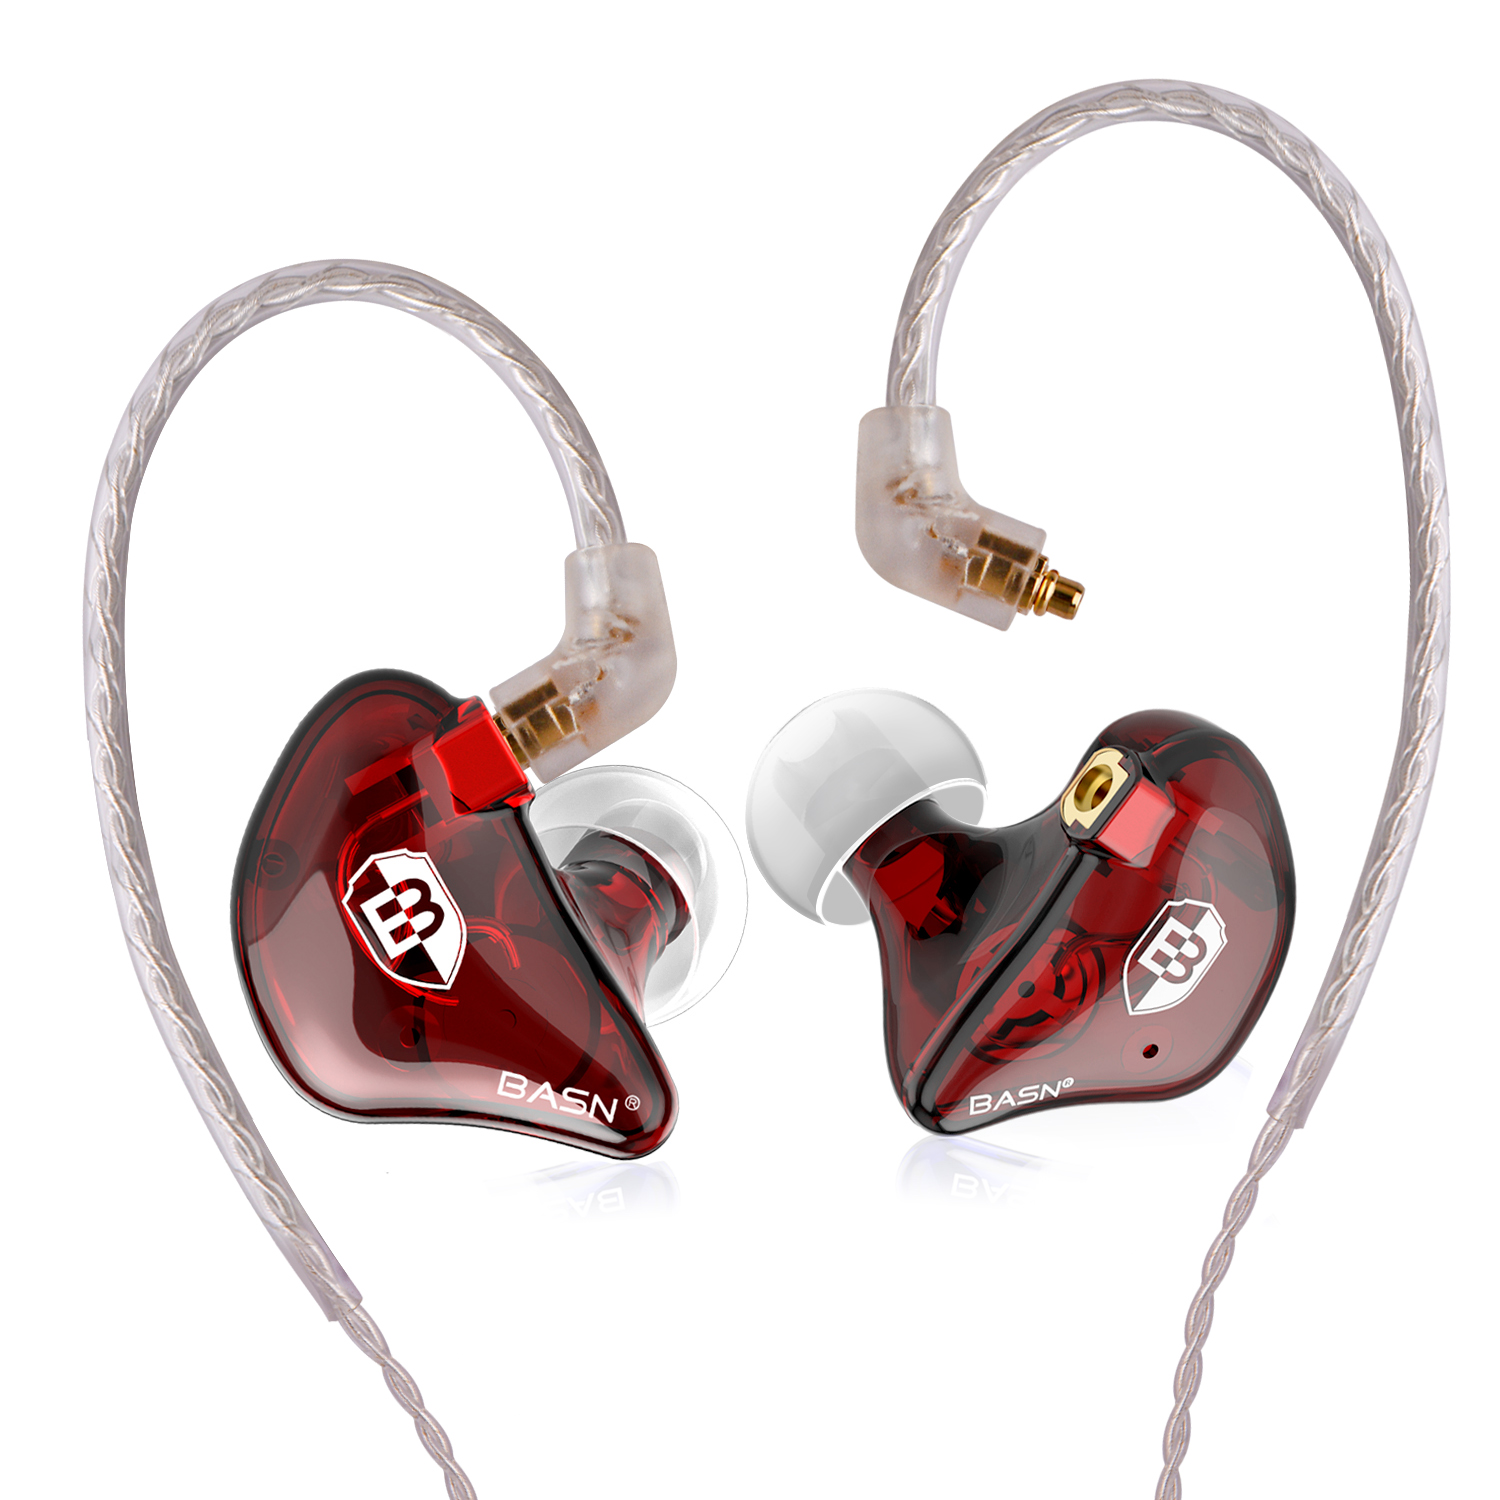 BASN Bsinger+LUX In-Ear Monitor (Wine red) - BASN@Color Your Ultimate Sound